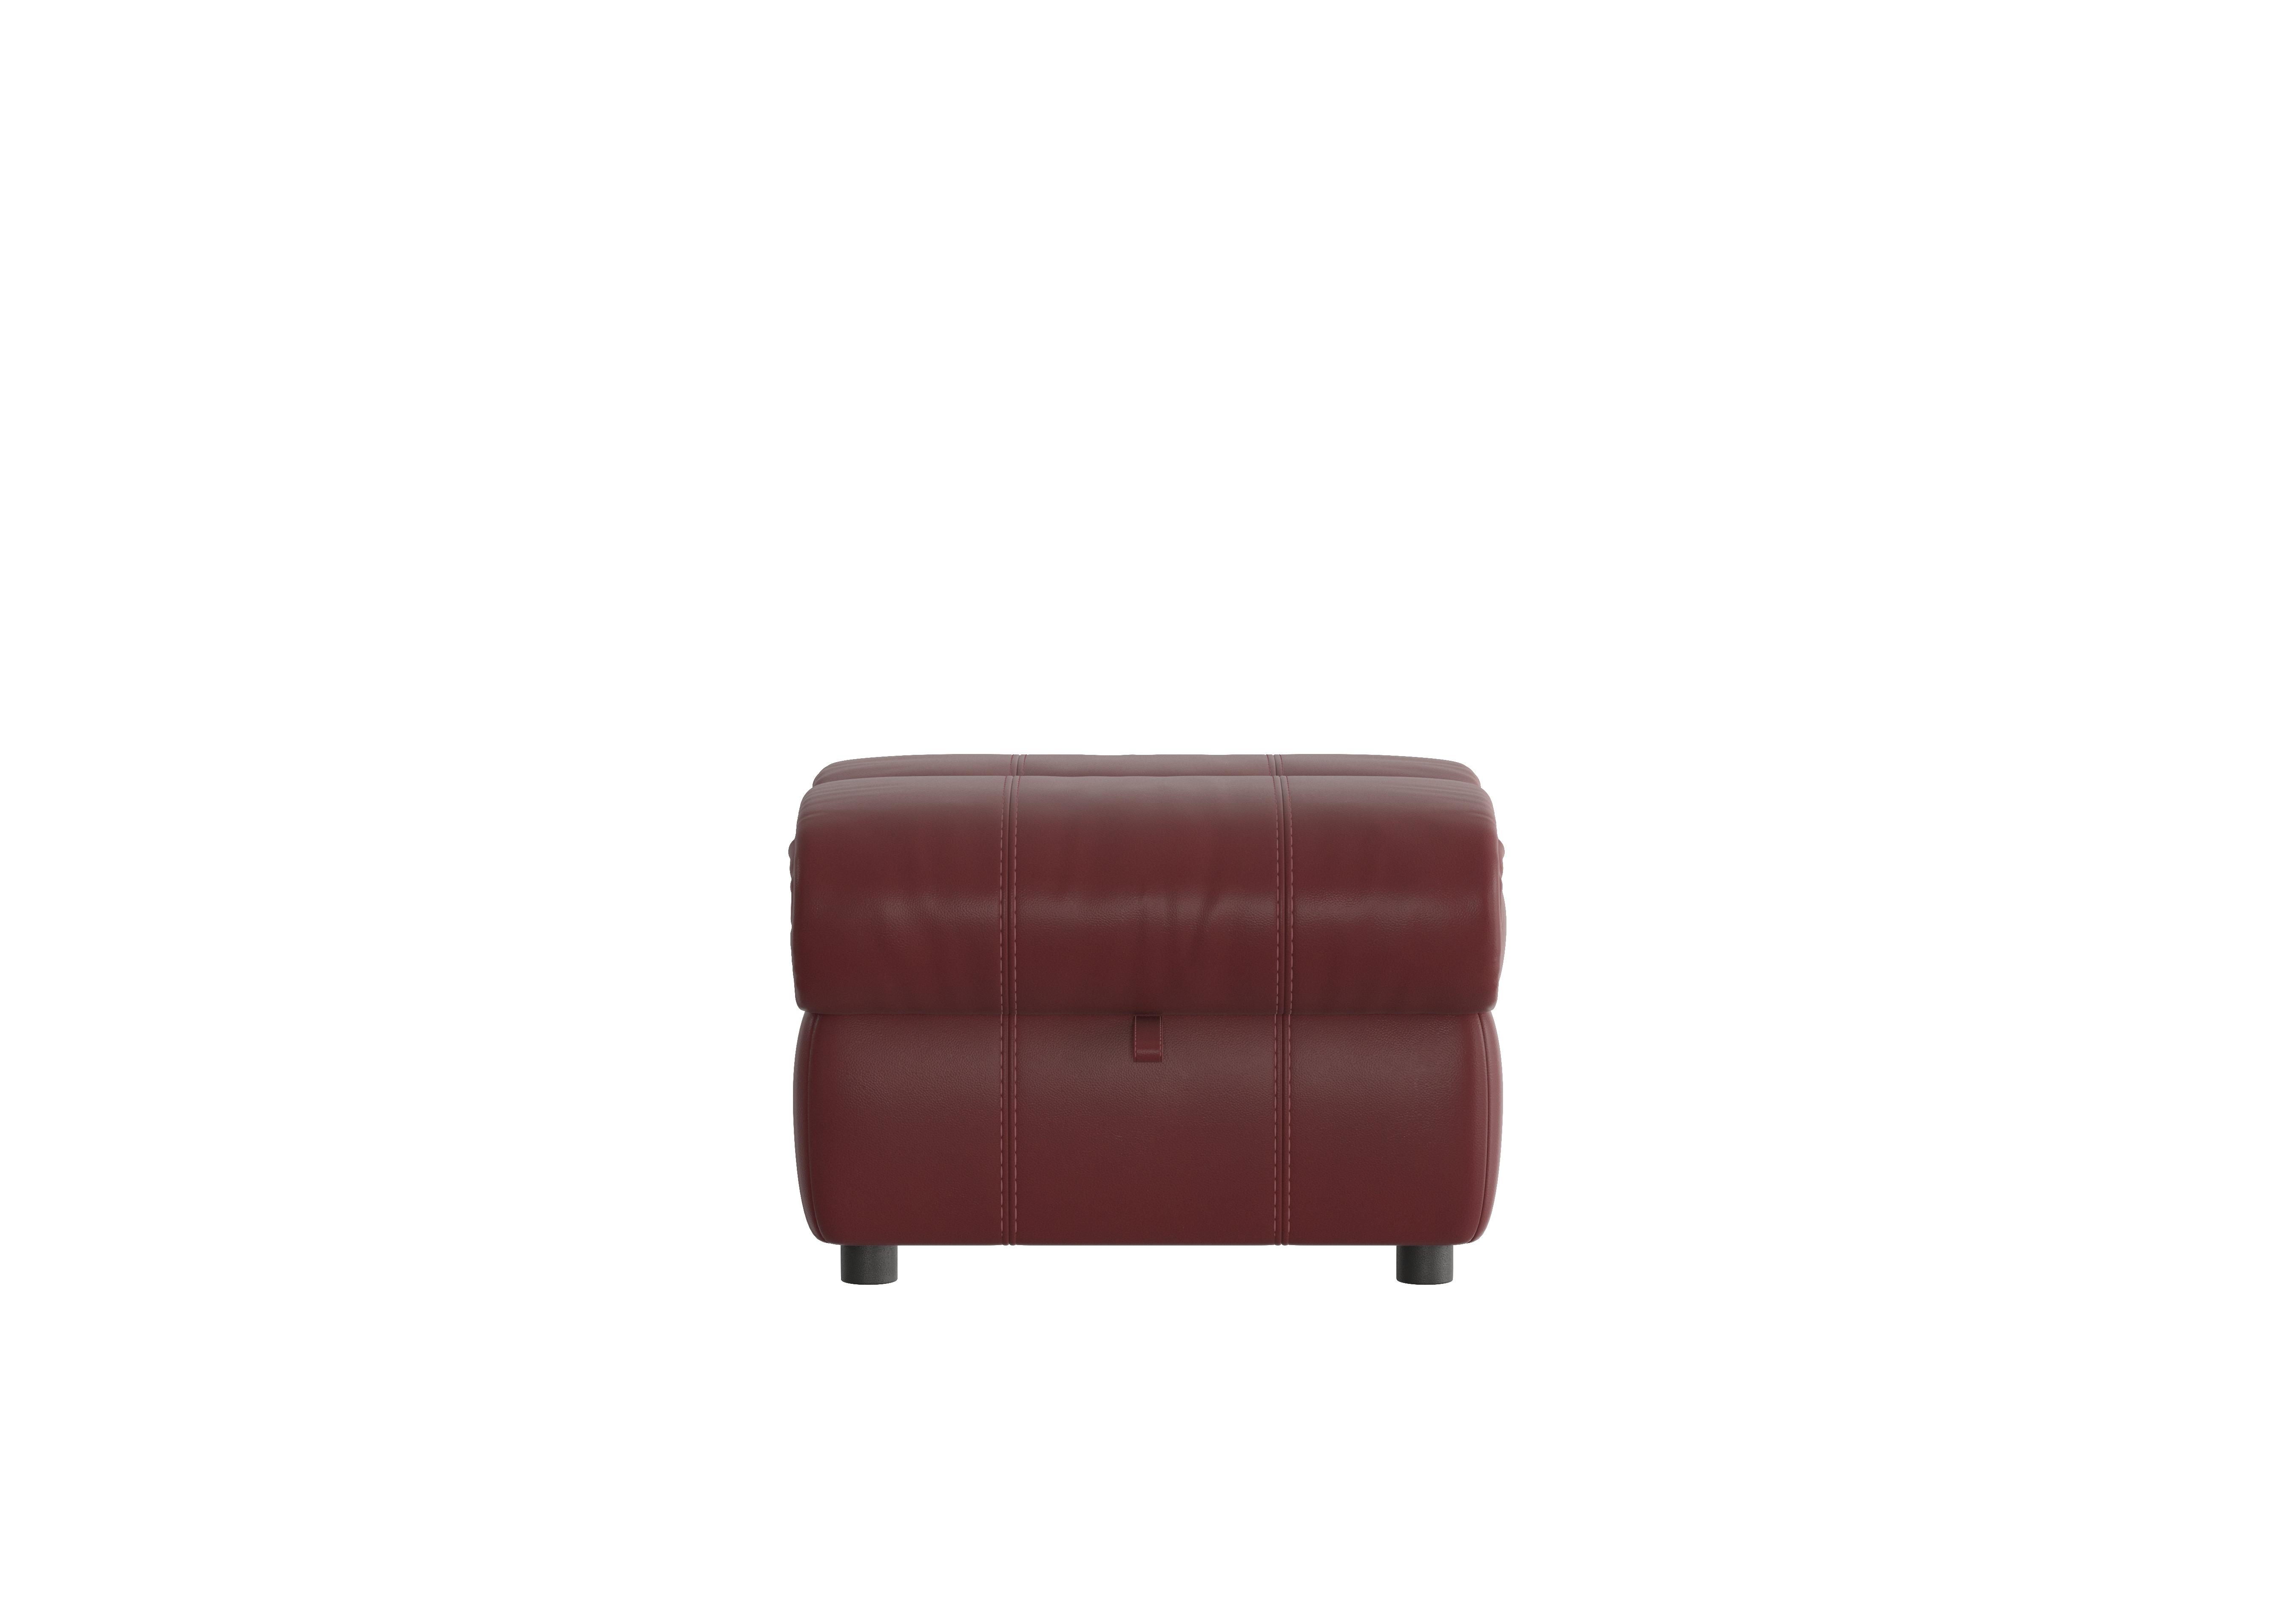 Link Leather Footstool in Bv-035c Deep Red on Furniture Village